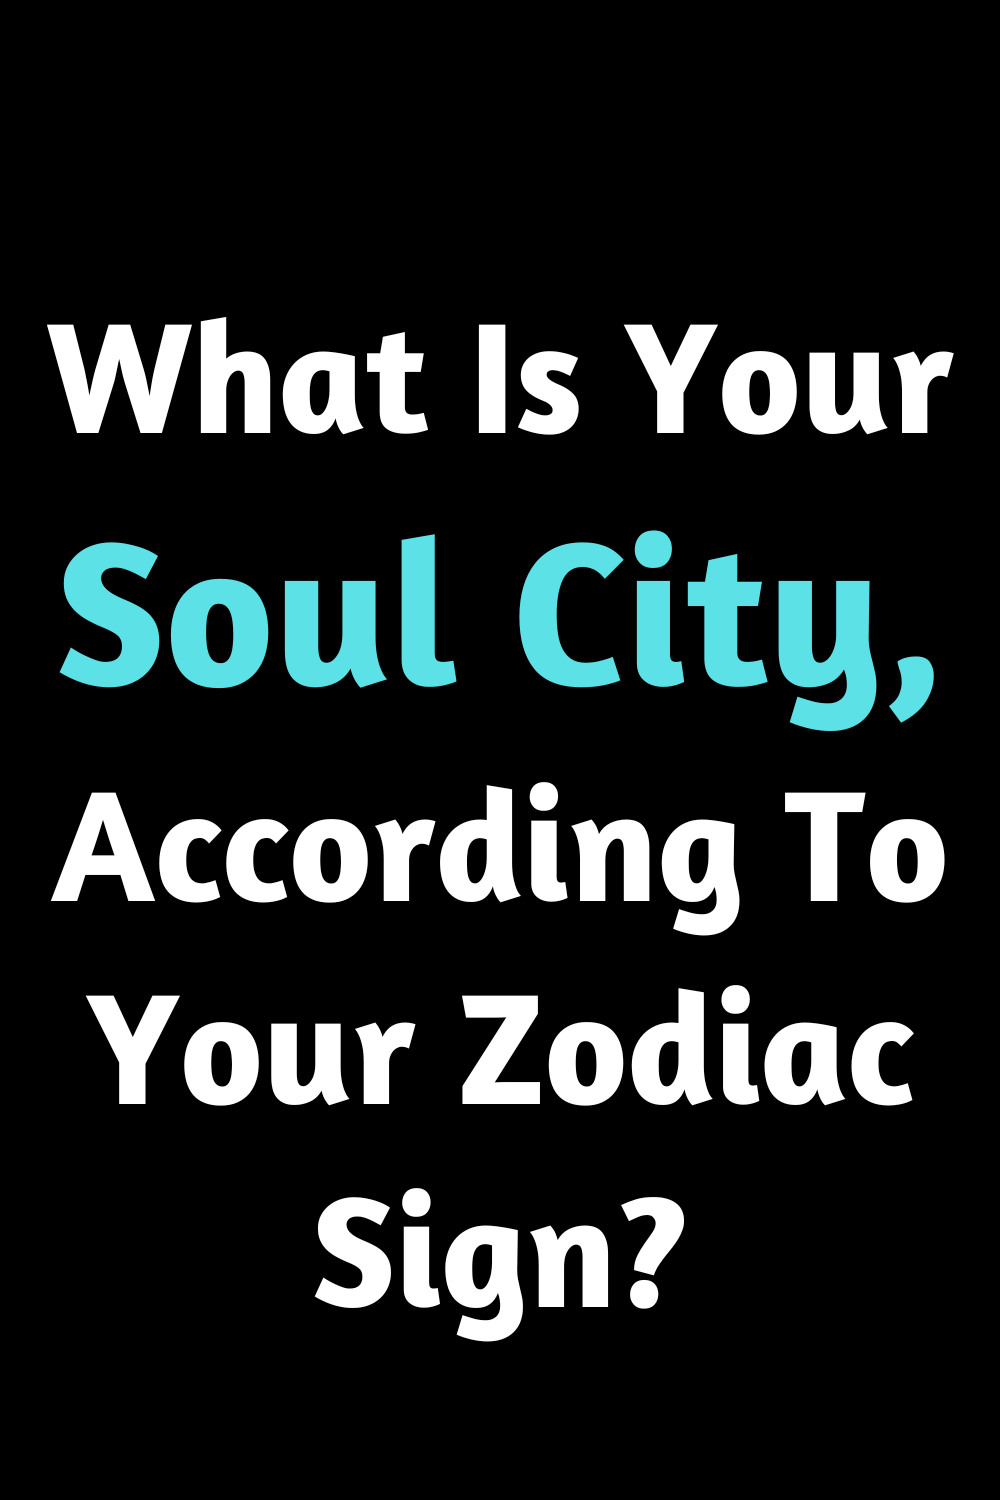 What Is Your Soul City, According To Your Zodiac Sign?